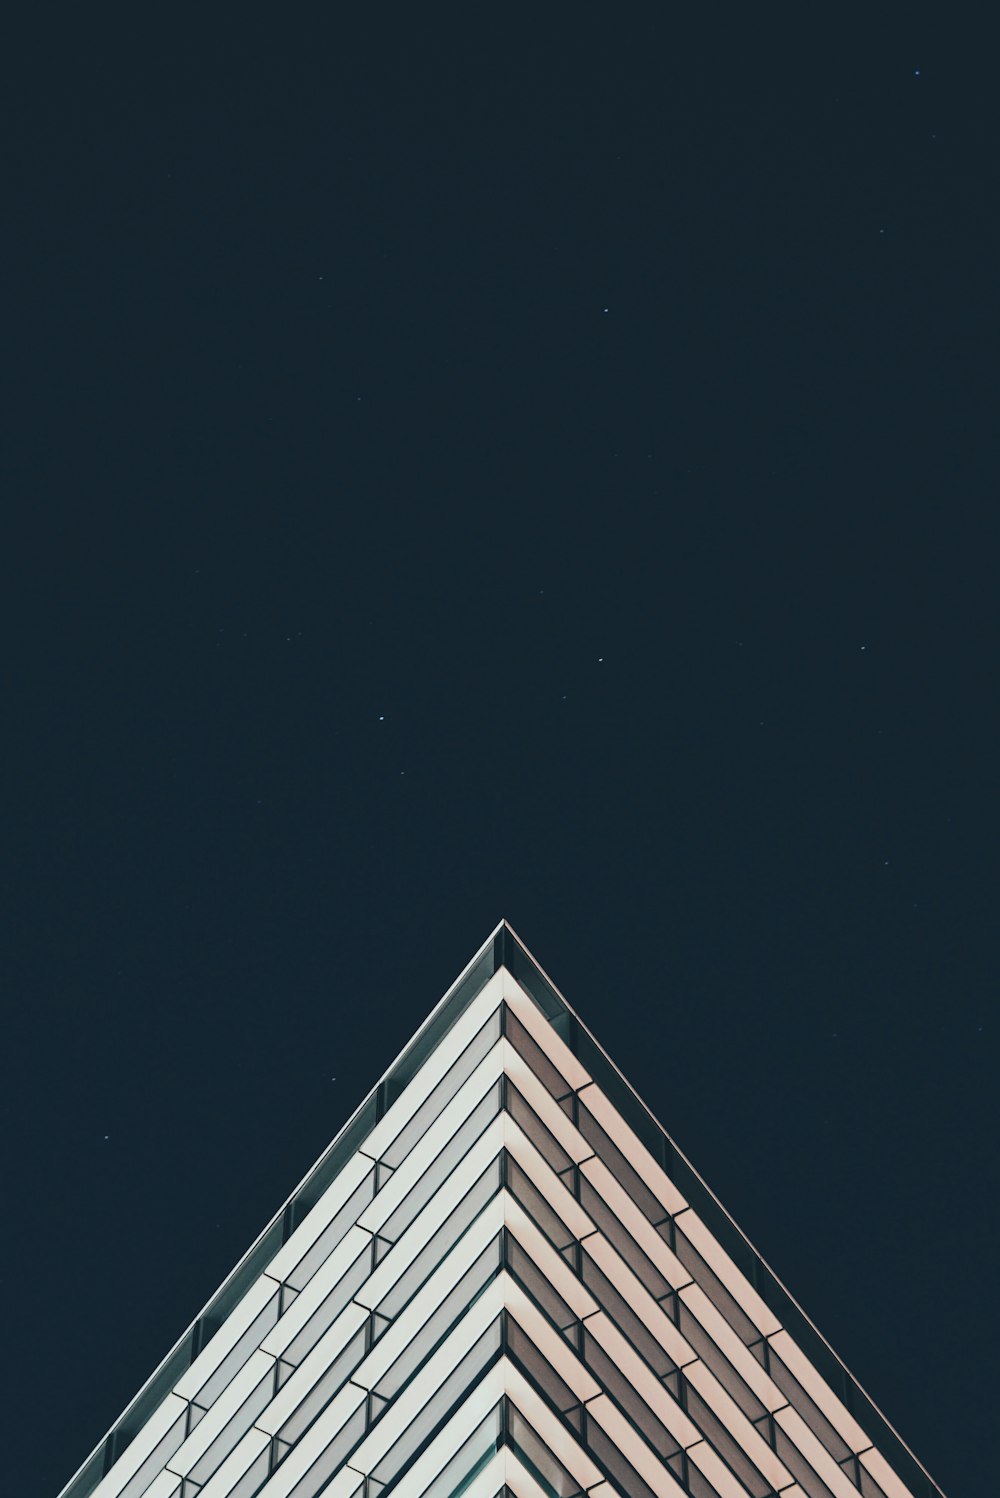 100+ Architecture Pictures [HQ] | Download Free Images on Unsplash